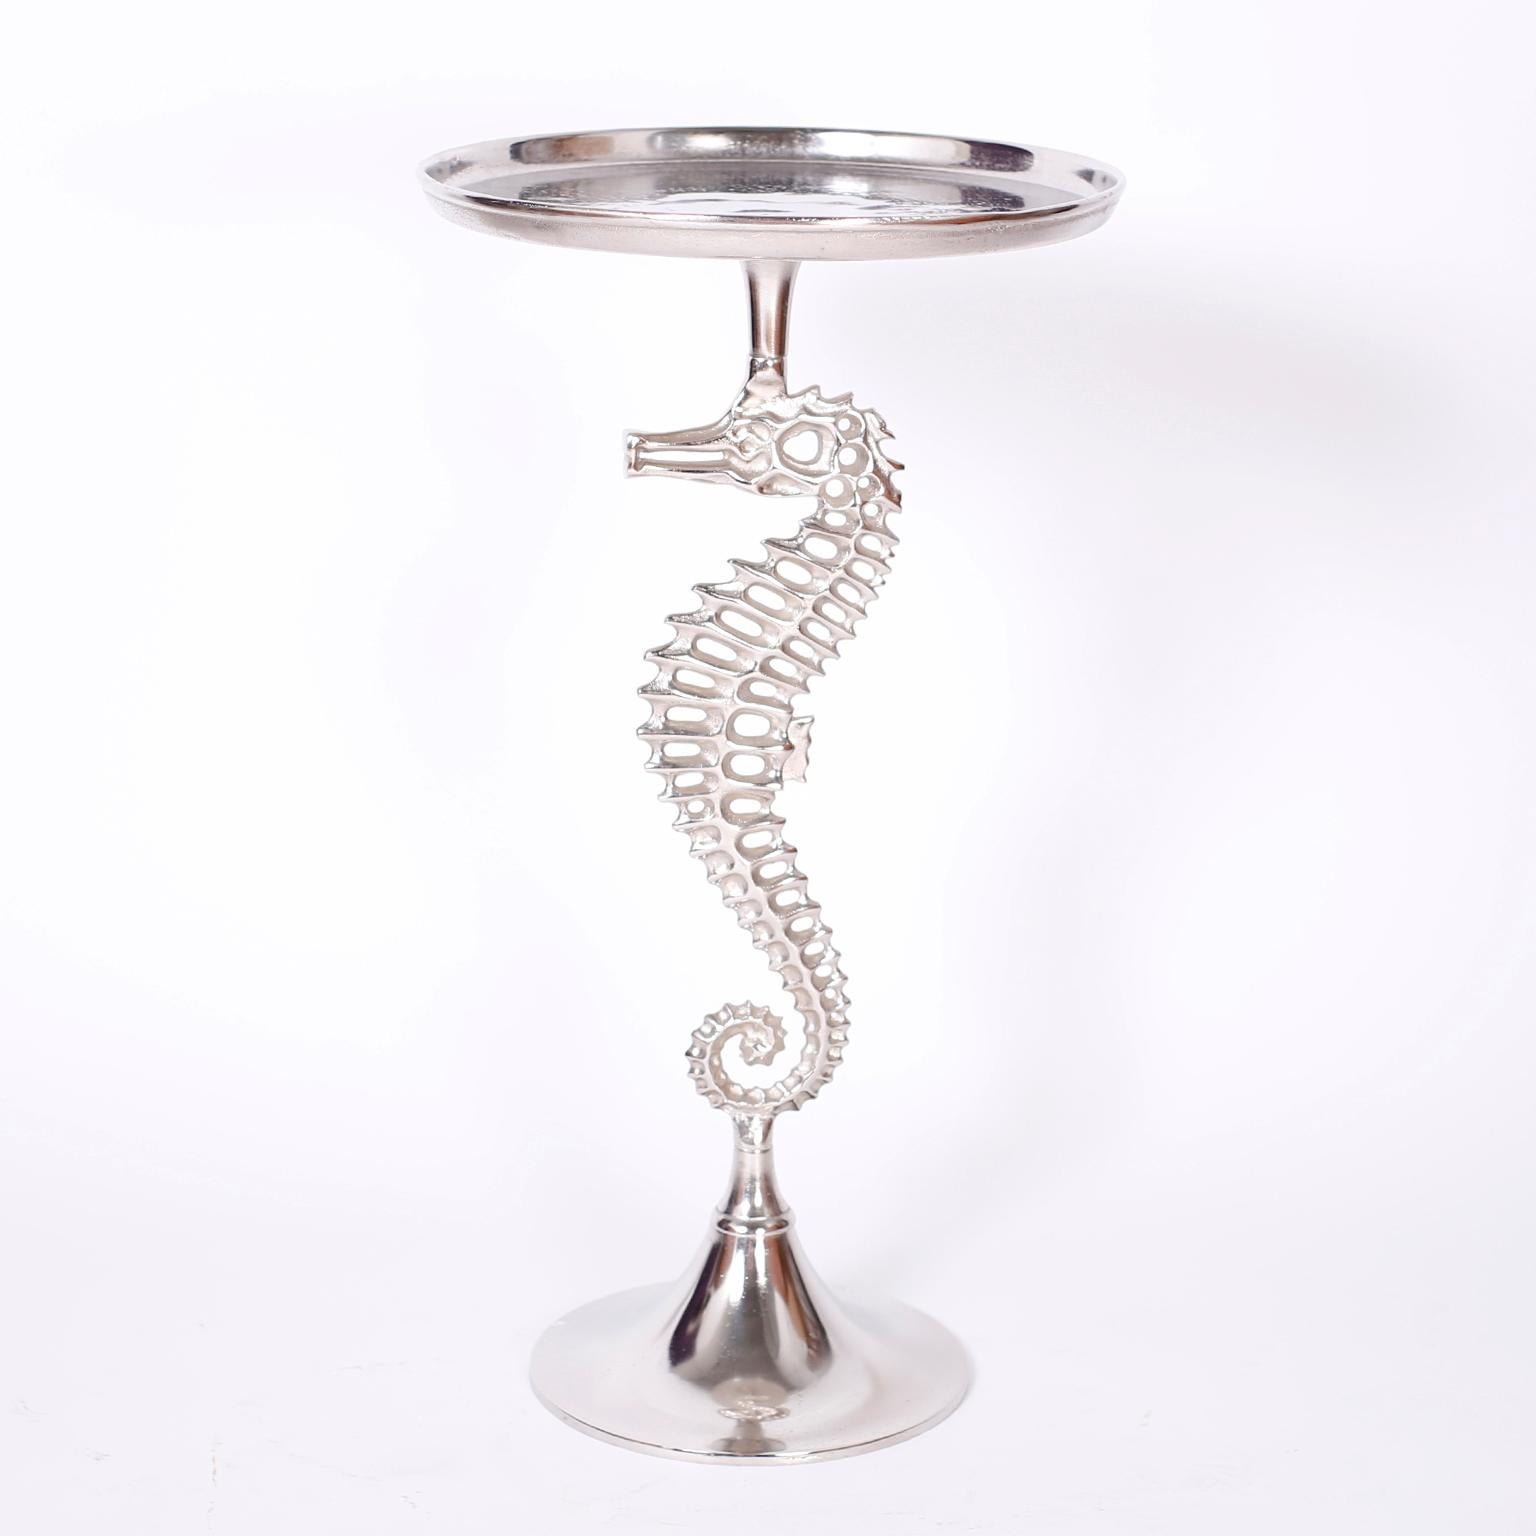 American Pair of Seahorse Drink Stands or Tables For Sale